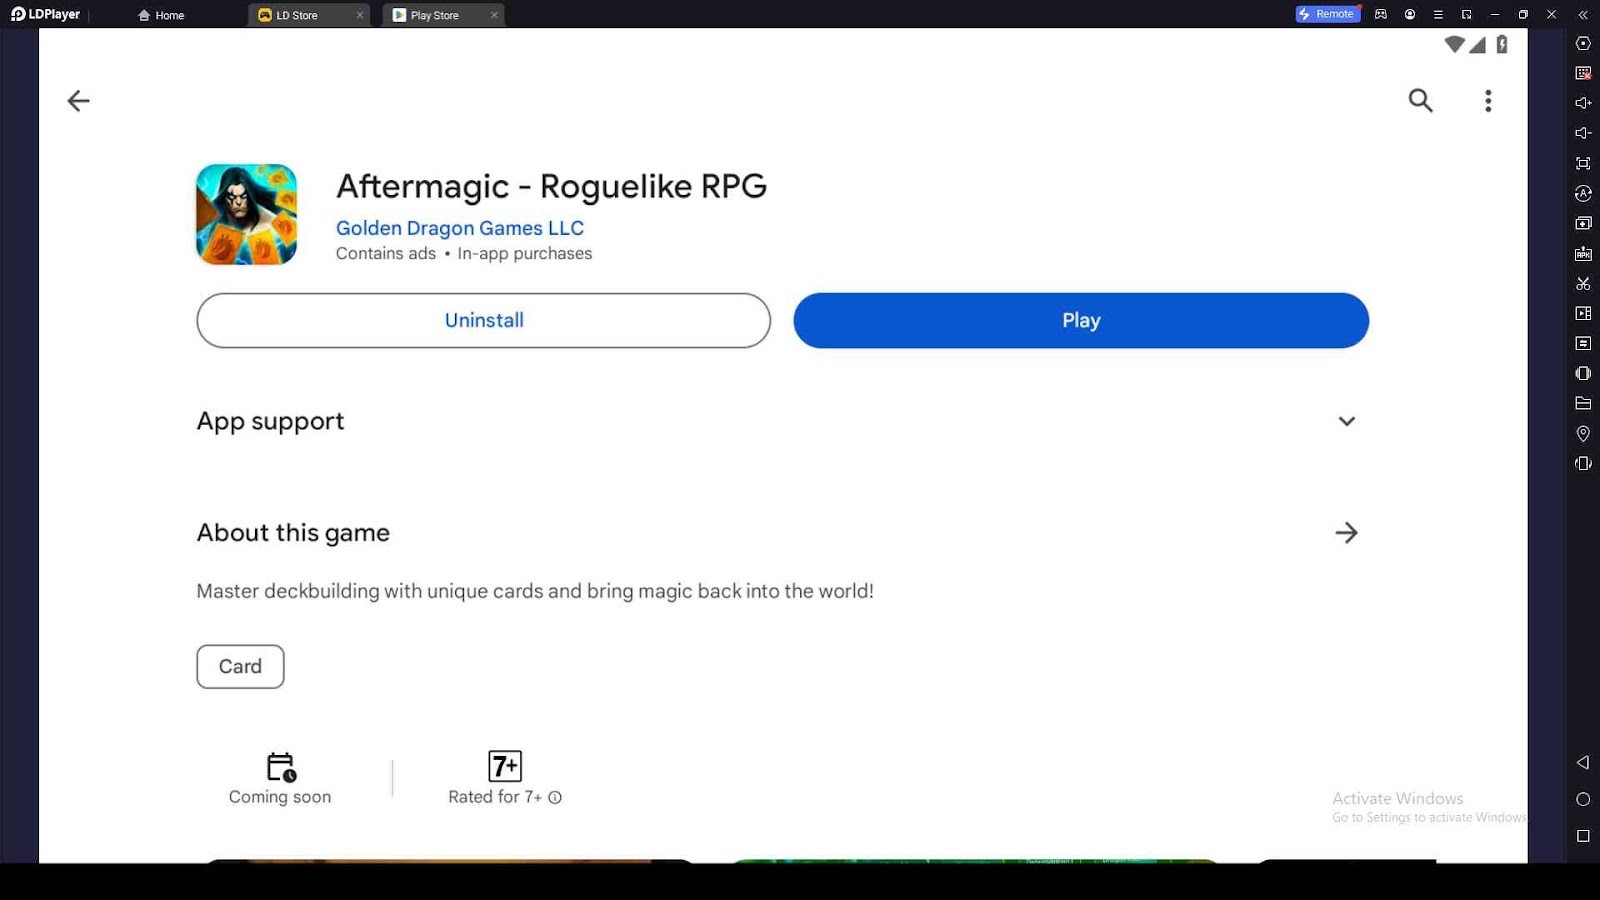 Playing Aftermagic - Roguelike RPG on PC with LDPlayer